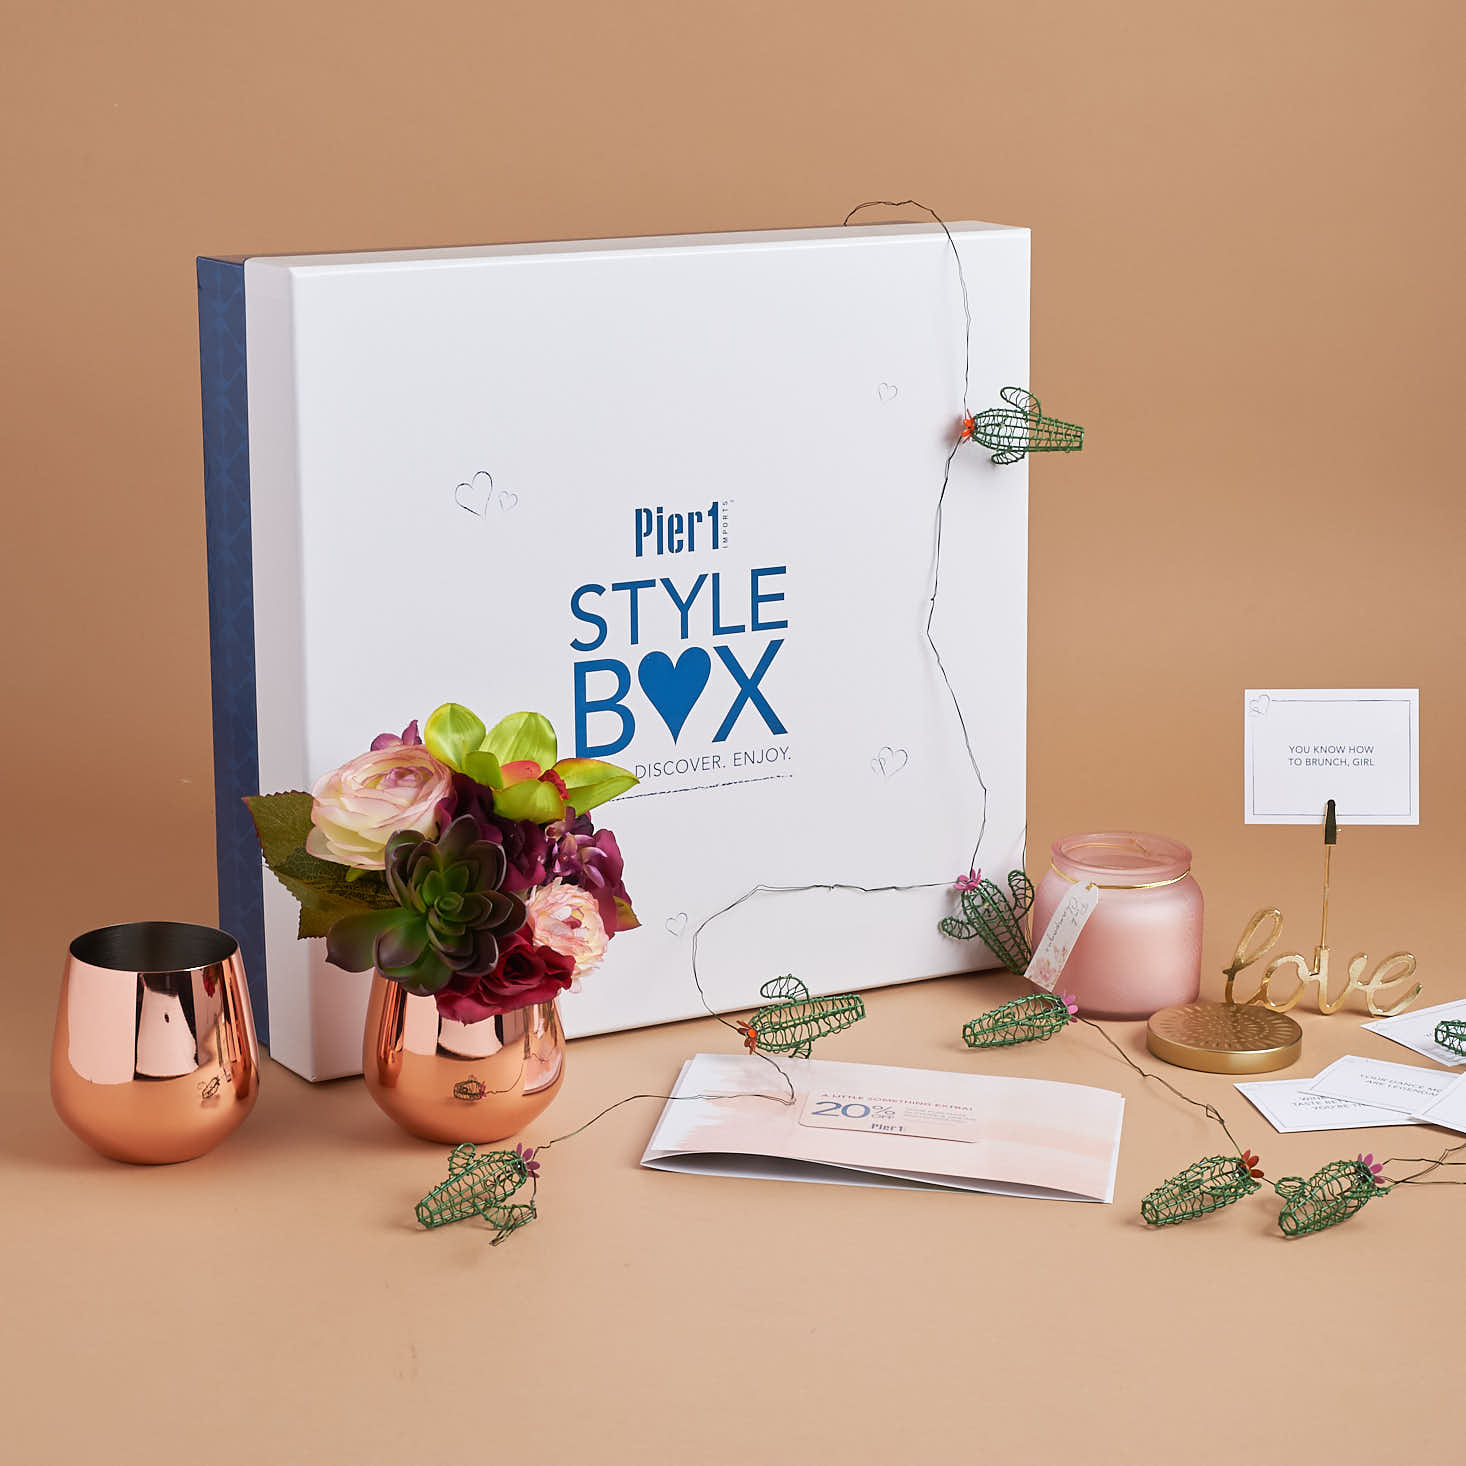 Pier 1 Style Box Review